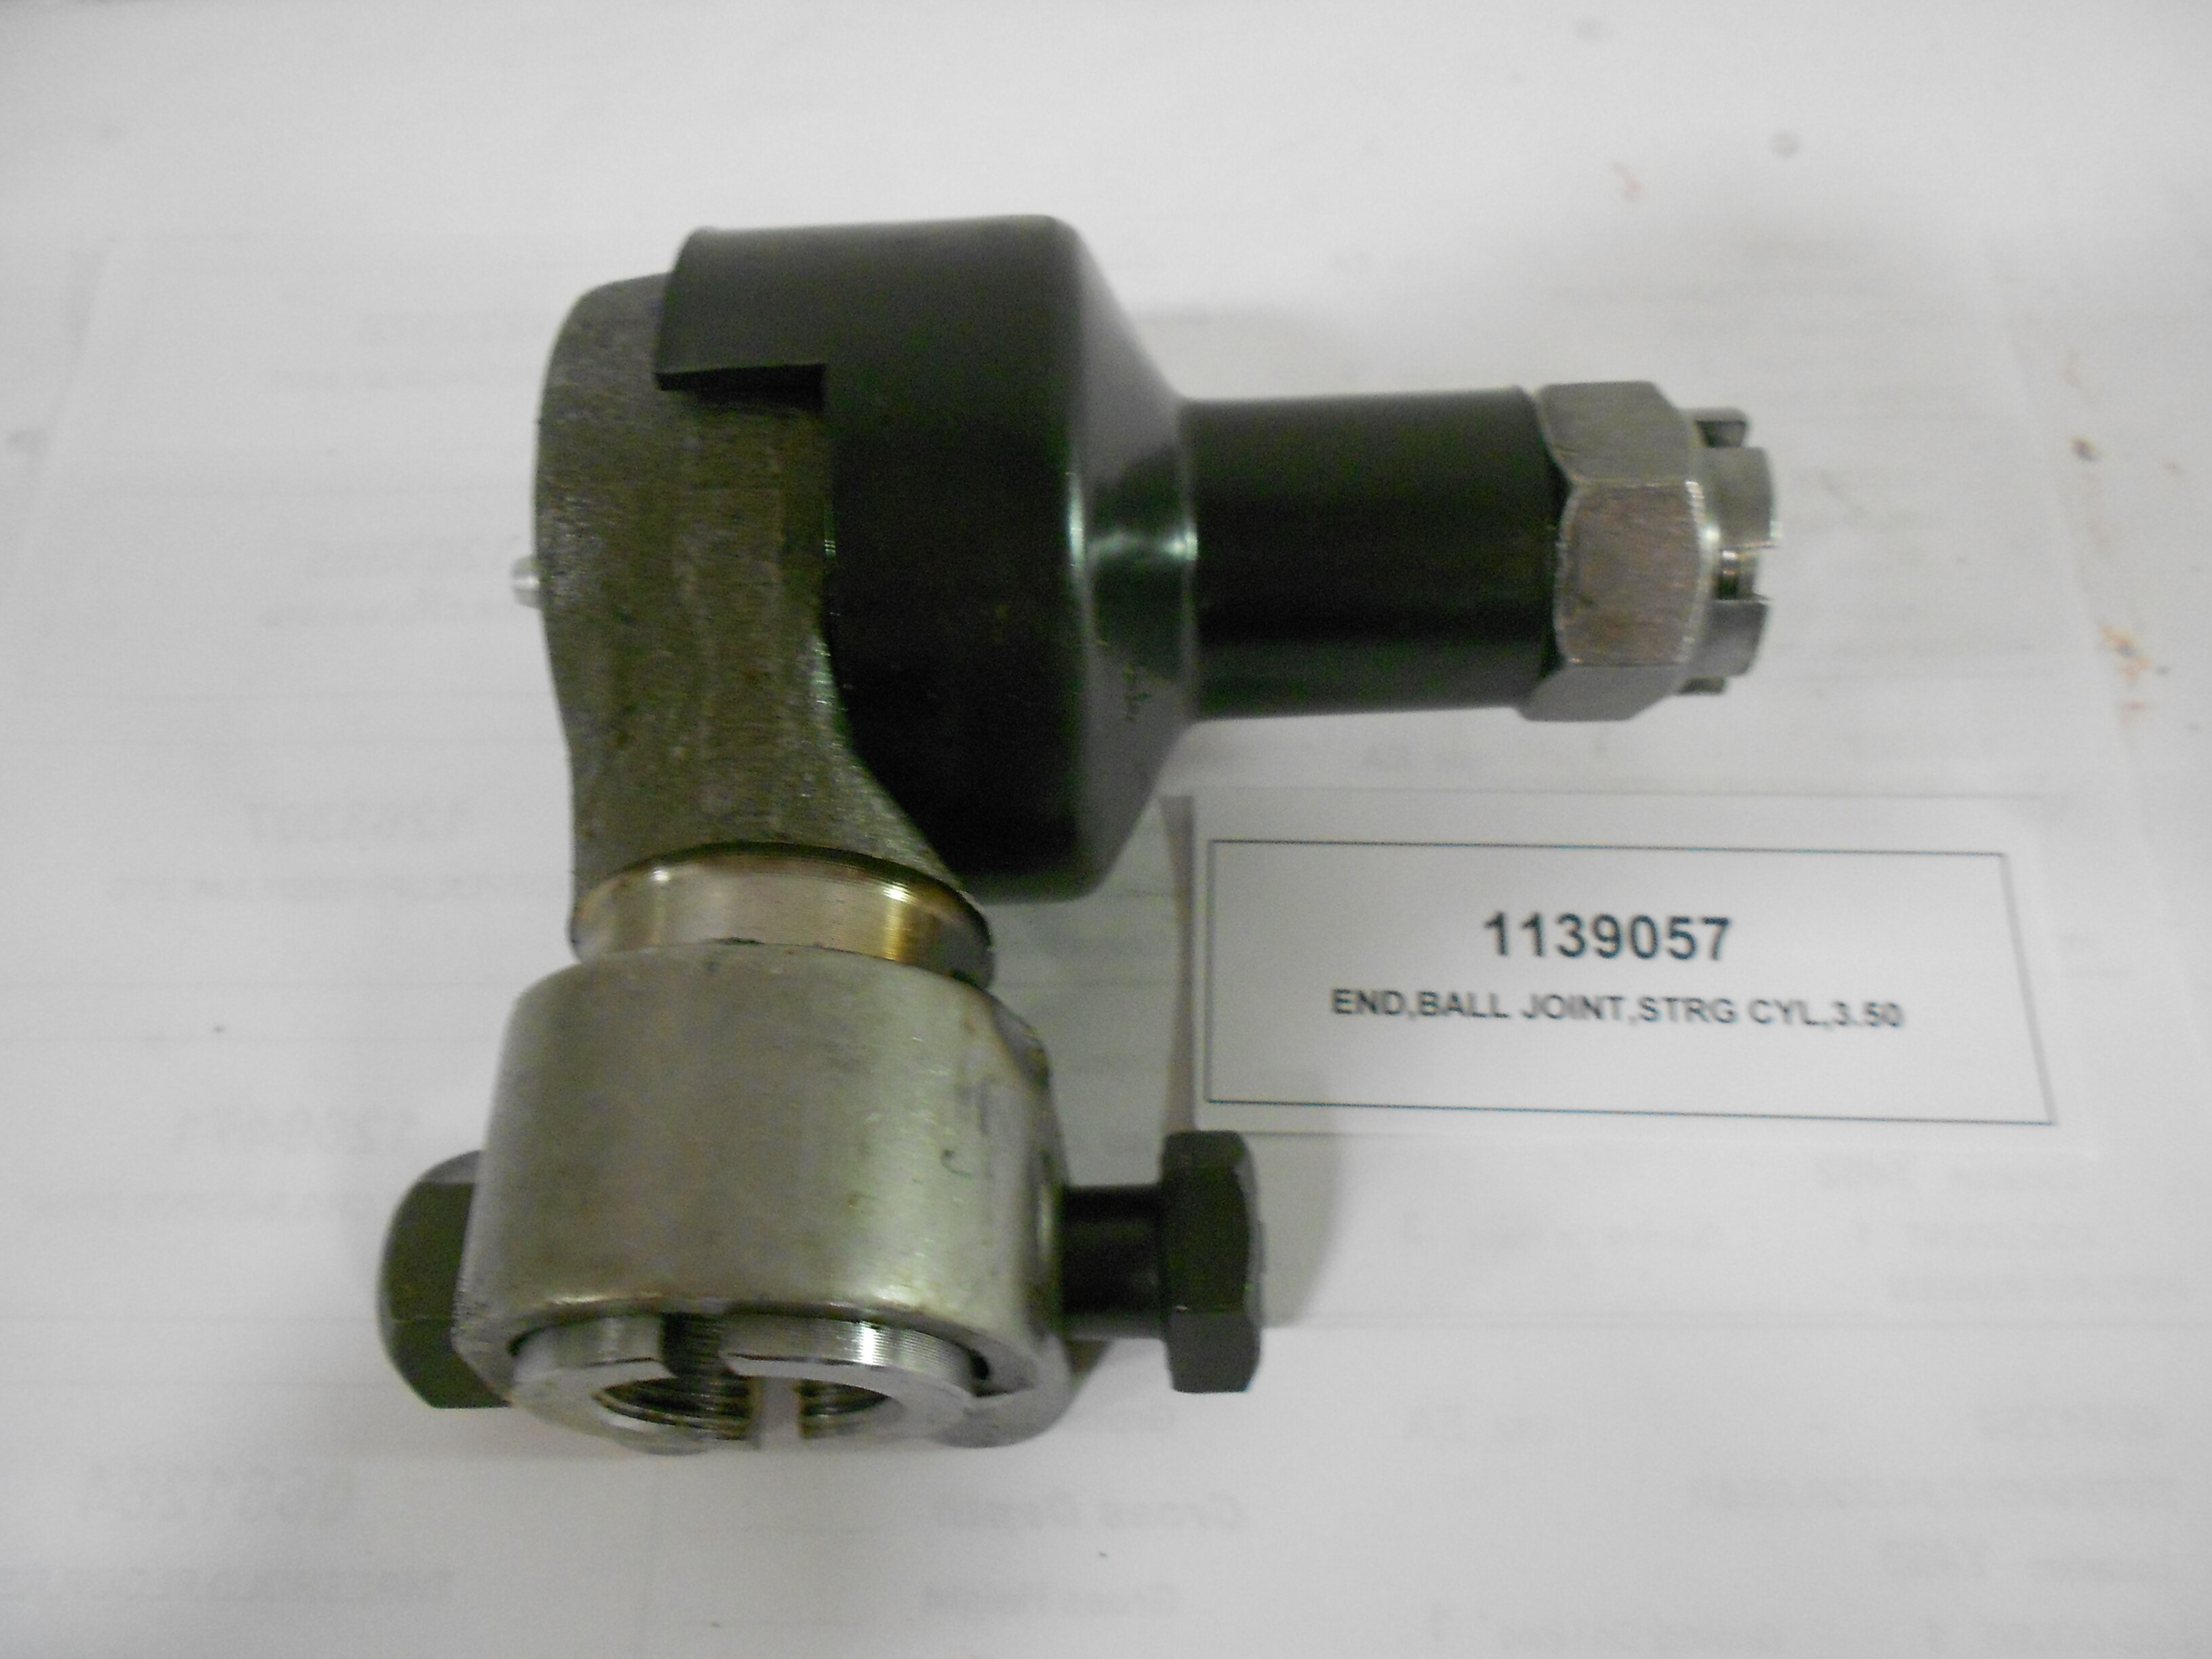 END,BALL JOINT,STRG CYL,3.50